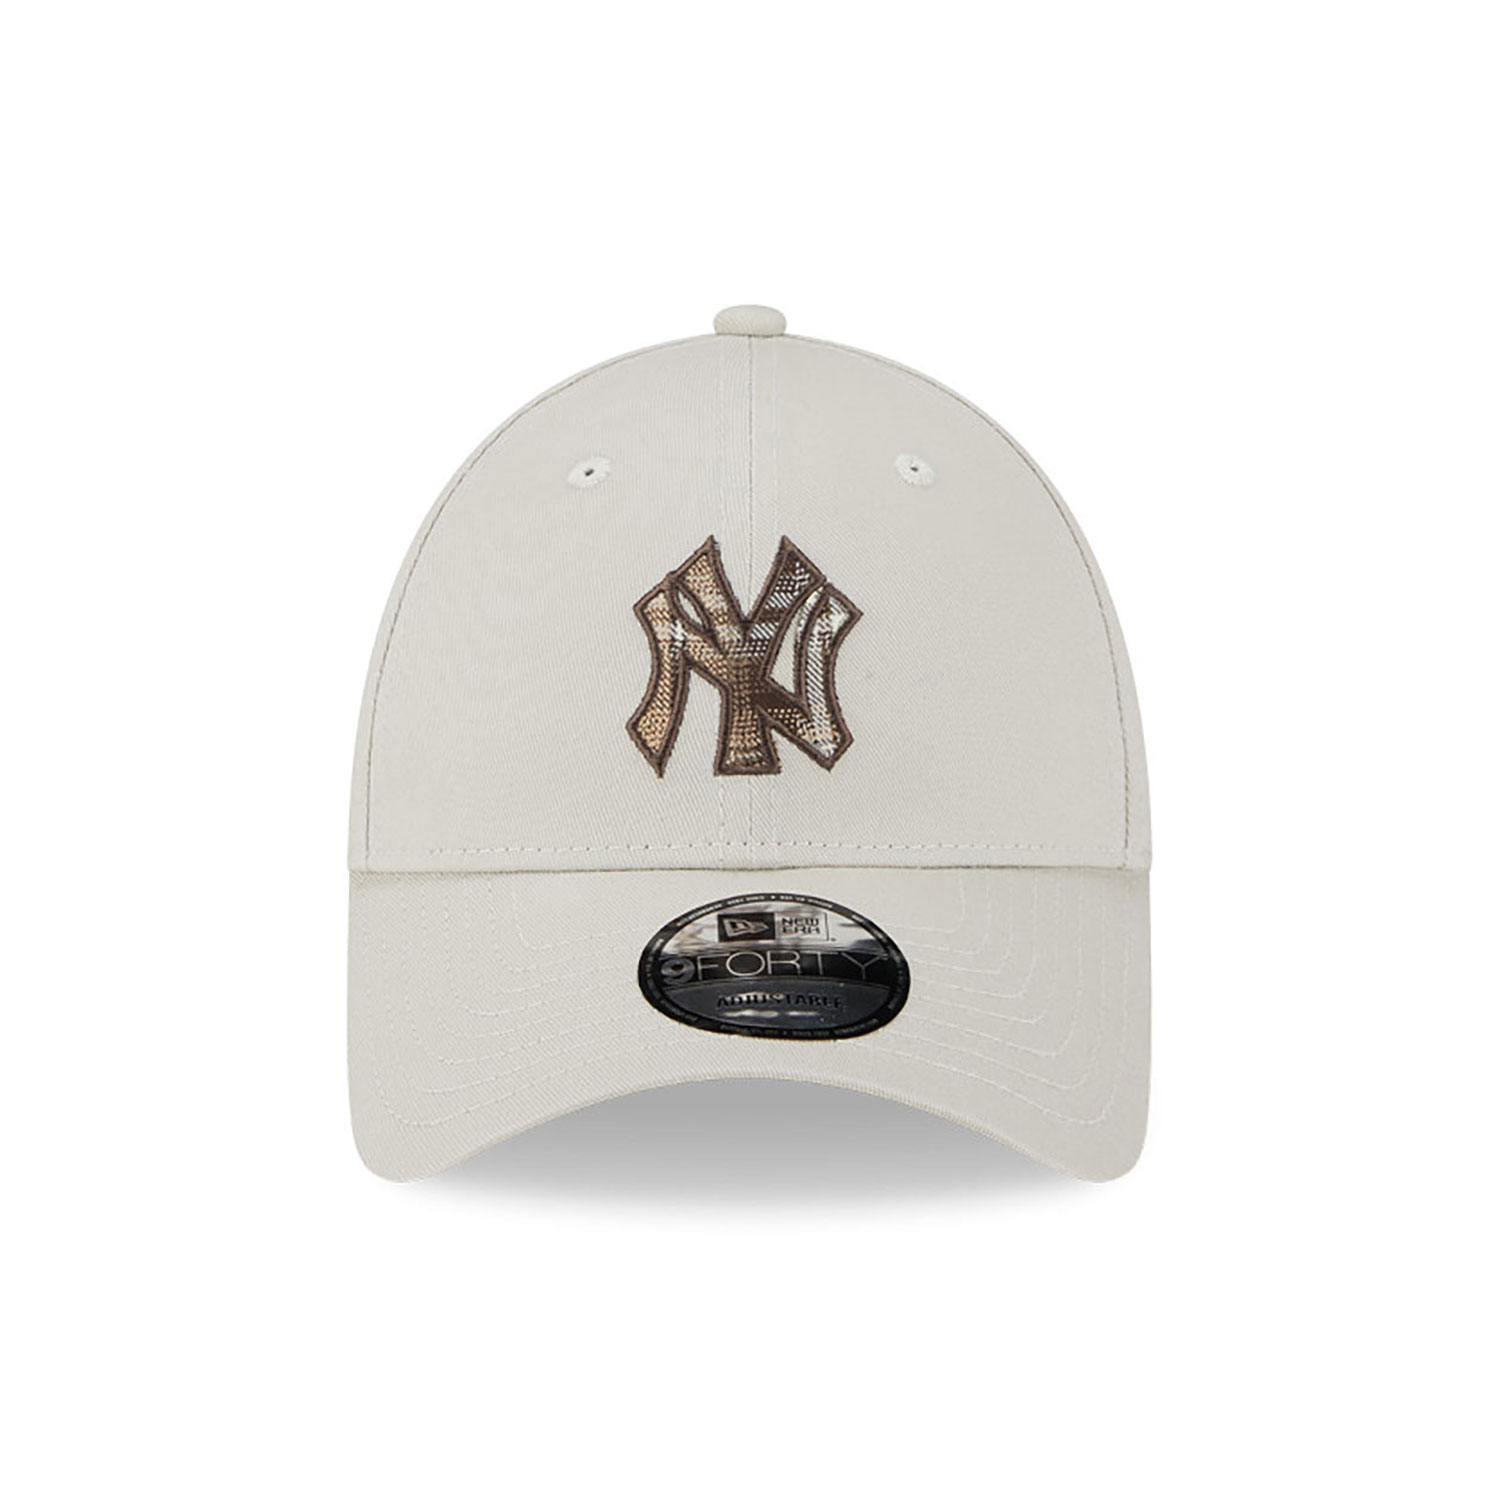 New York Yankees Check Infill Stone 9FORTY Adjustable Cap